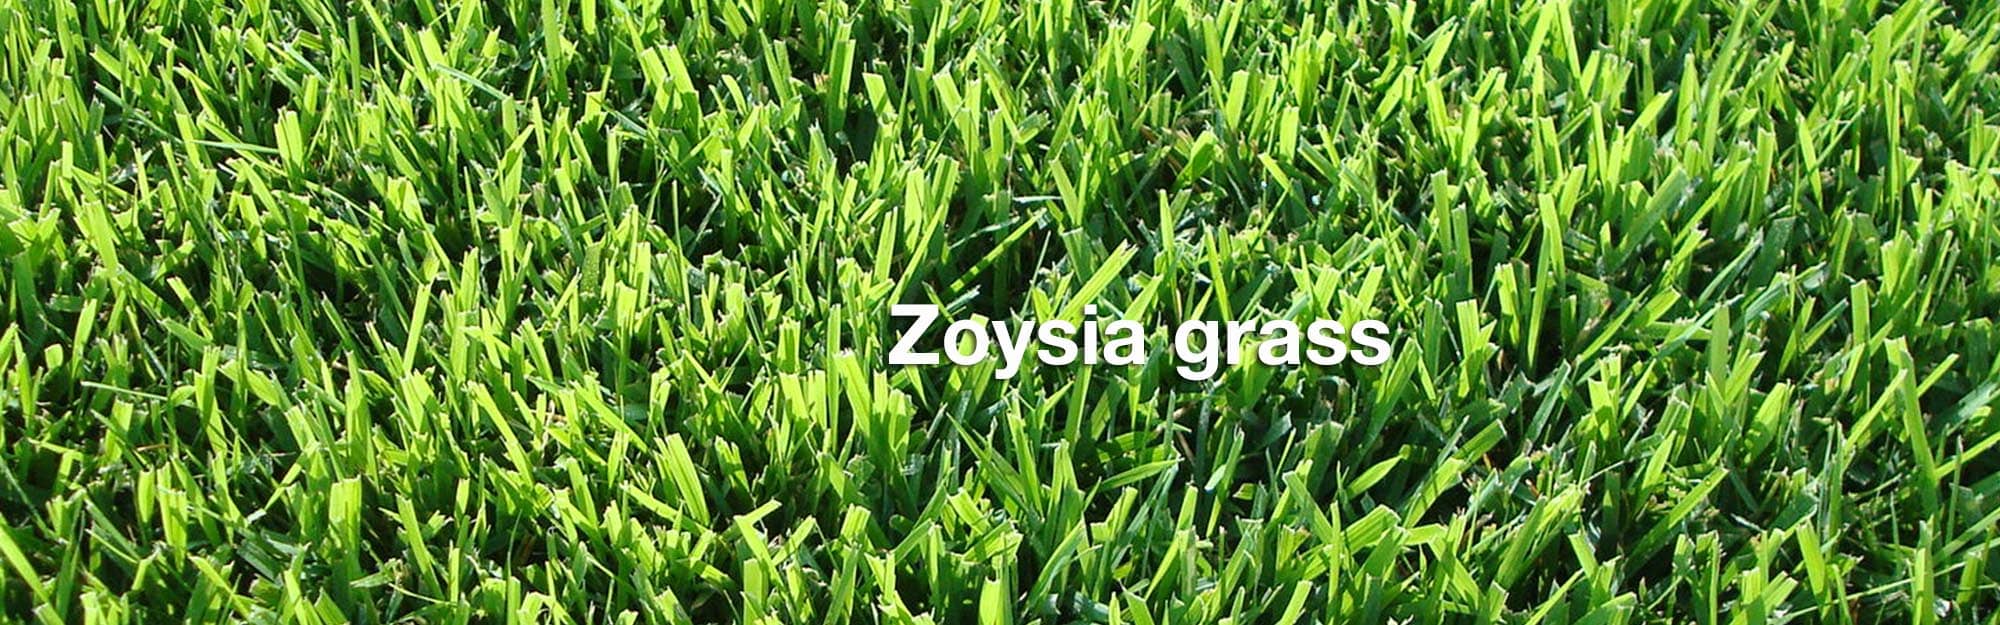 Zoysia grass is a common type of turfgrass forund on Guam.